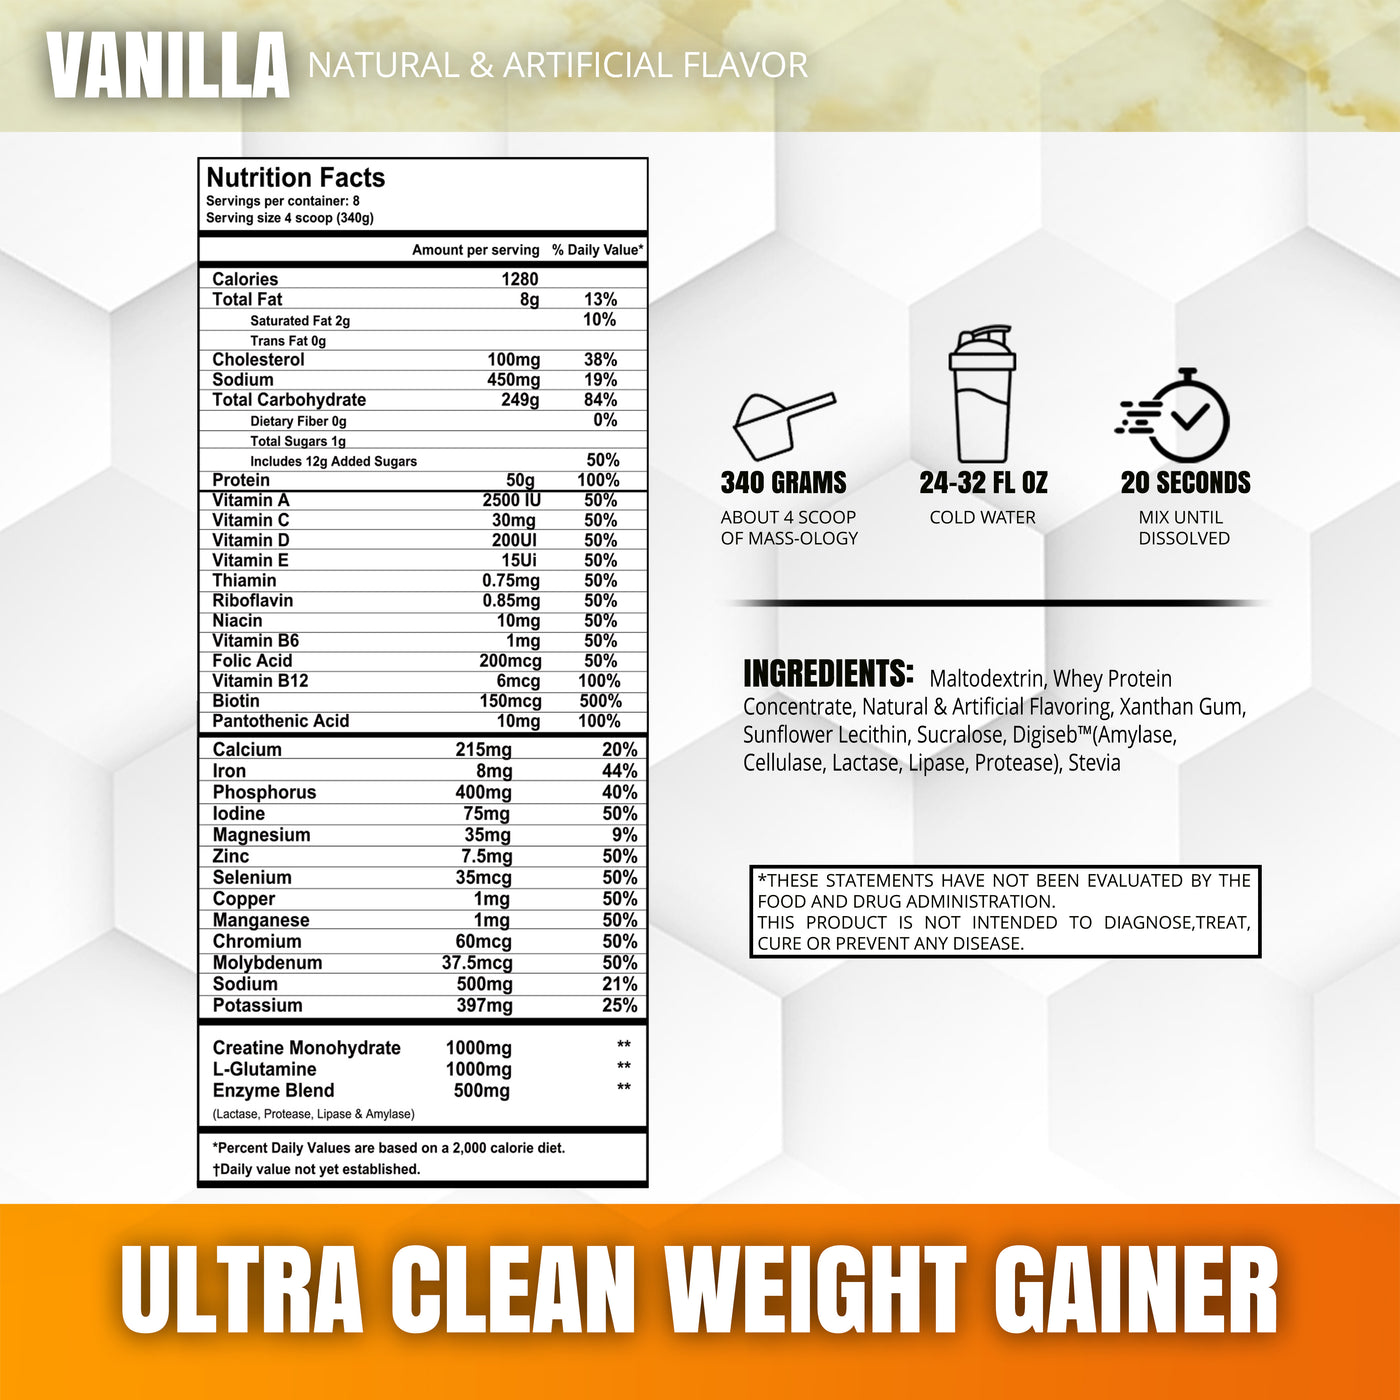 Mass-ology™ - Clean Weight Gainer